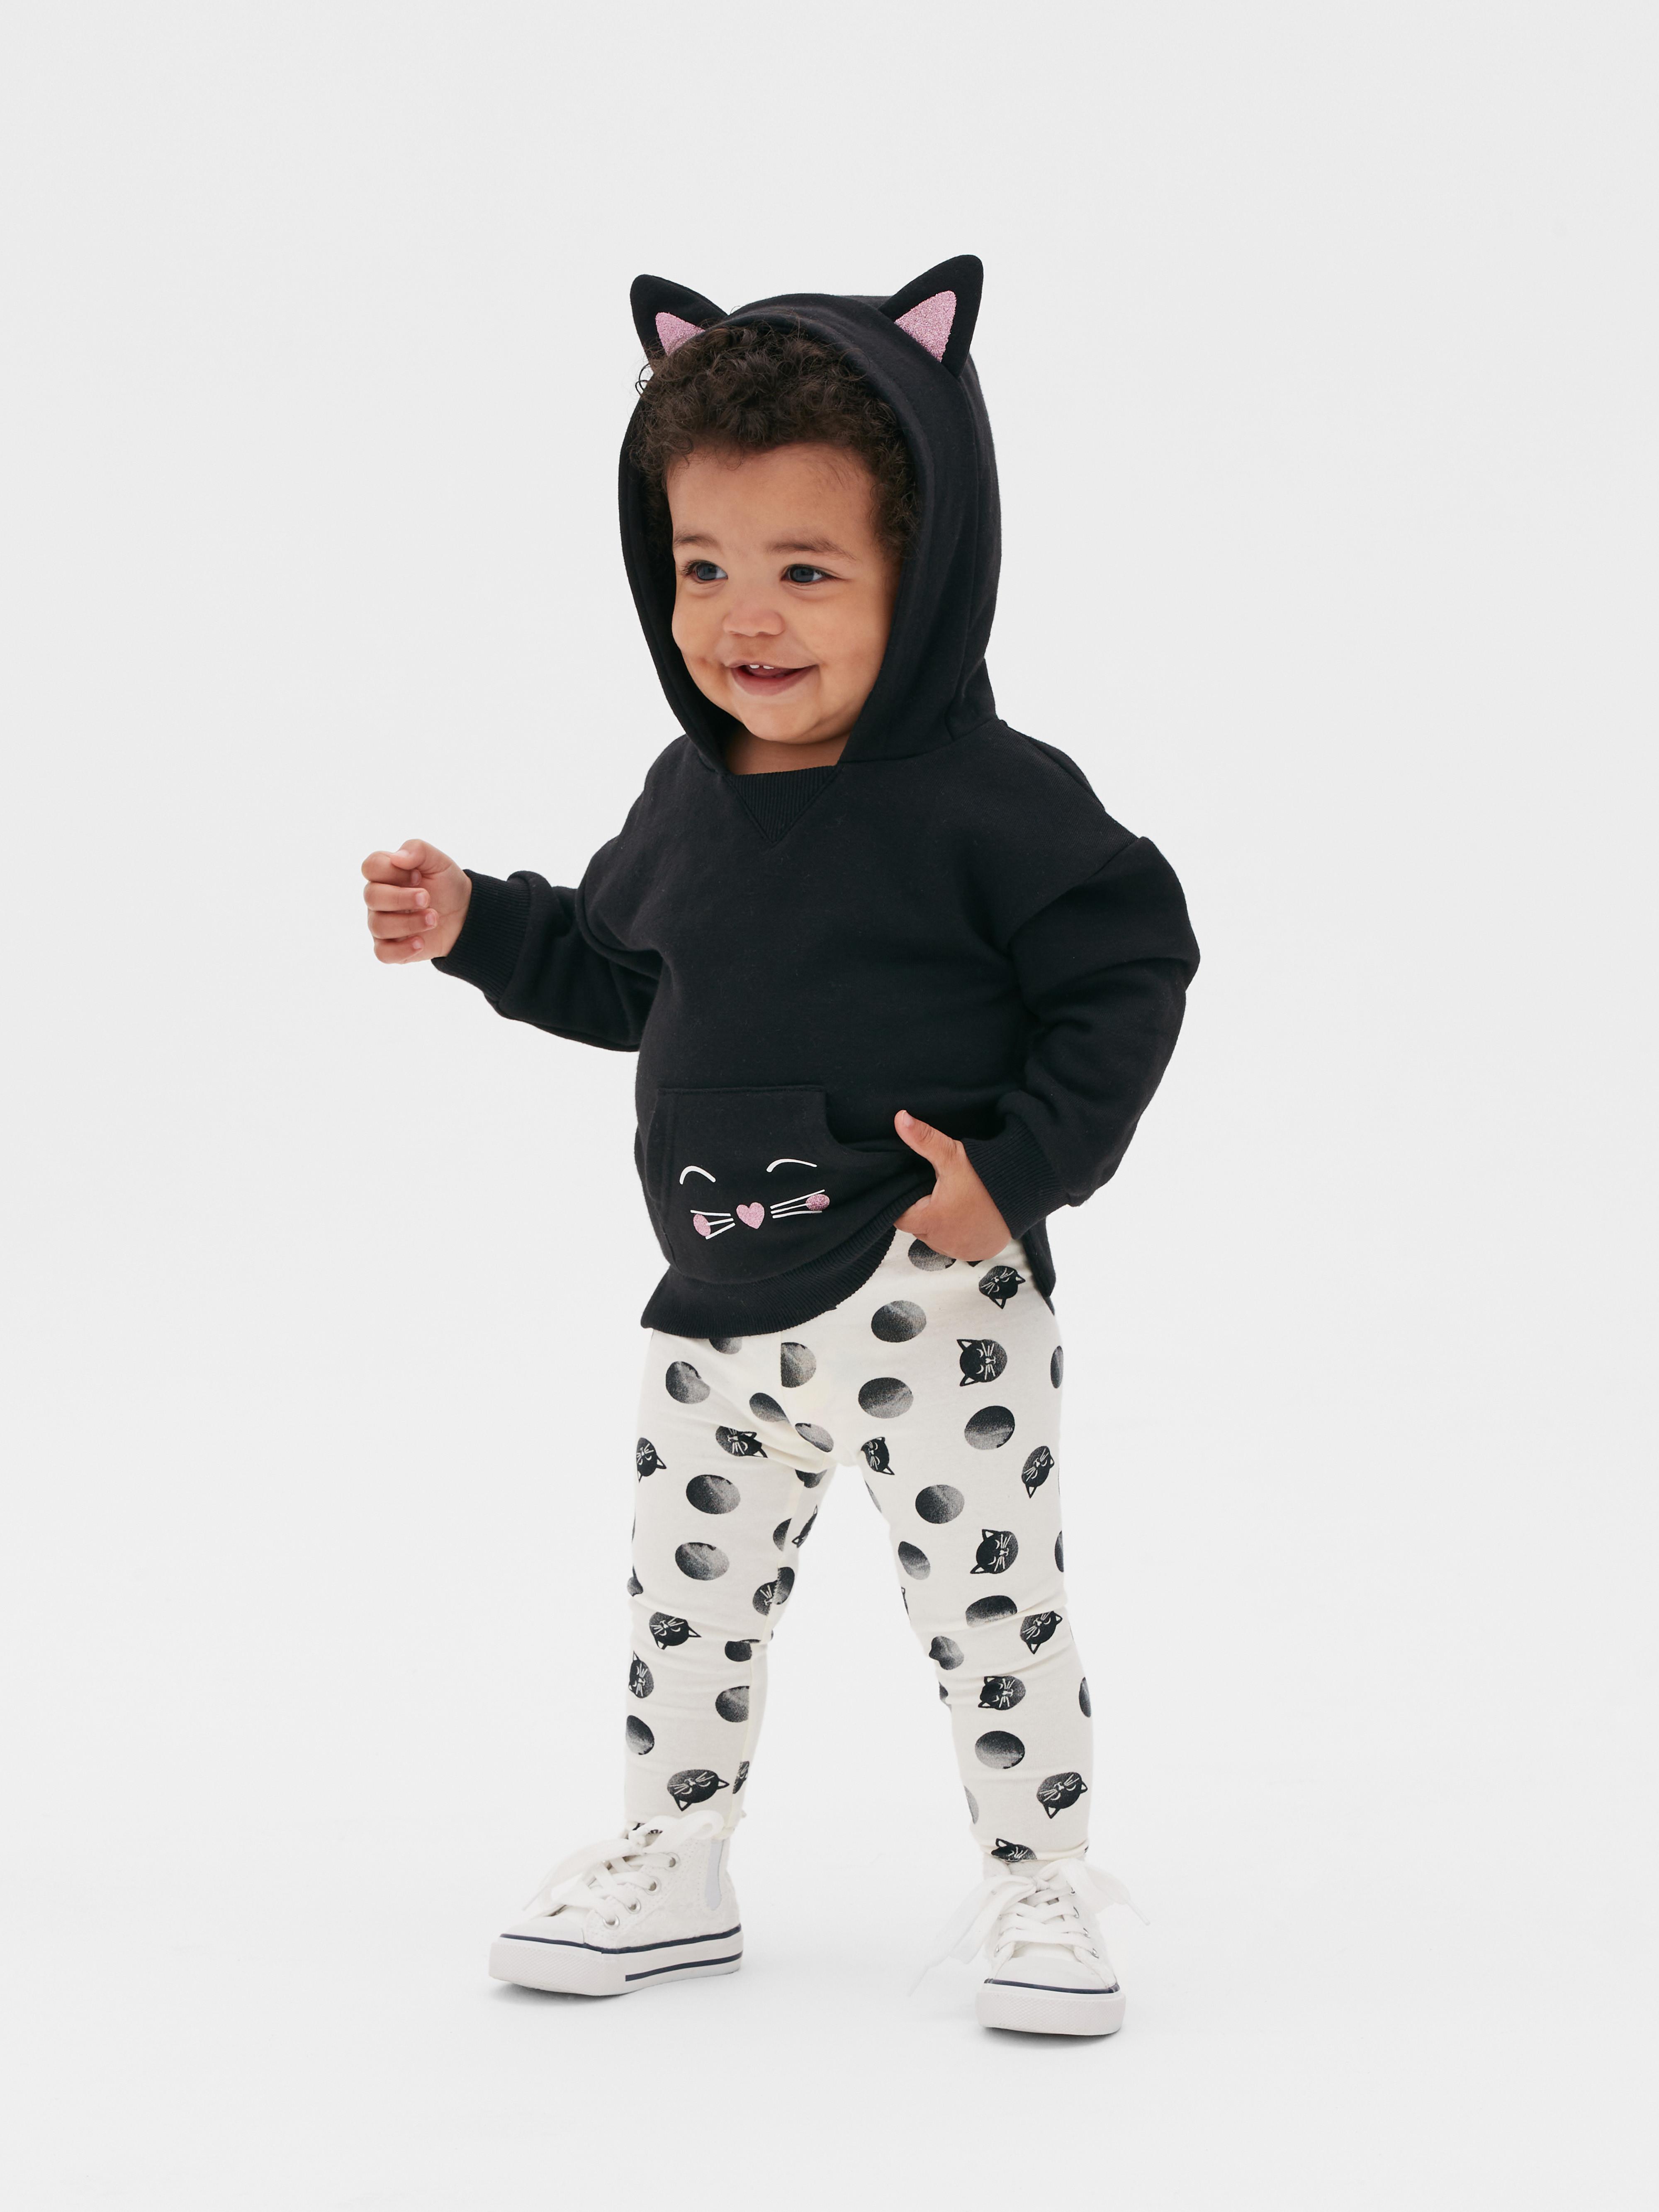 Cat Ear Hooded Top and Trouser Set